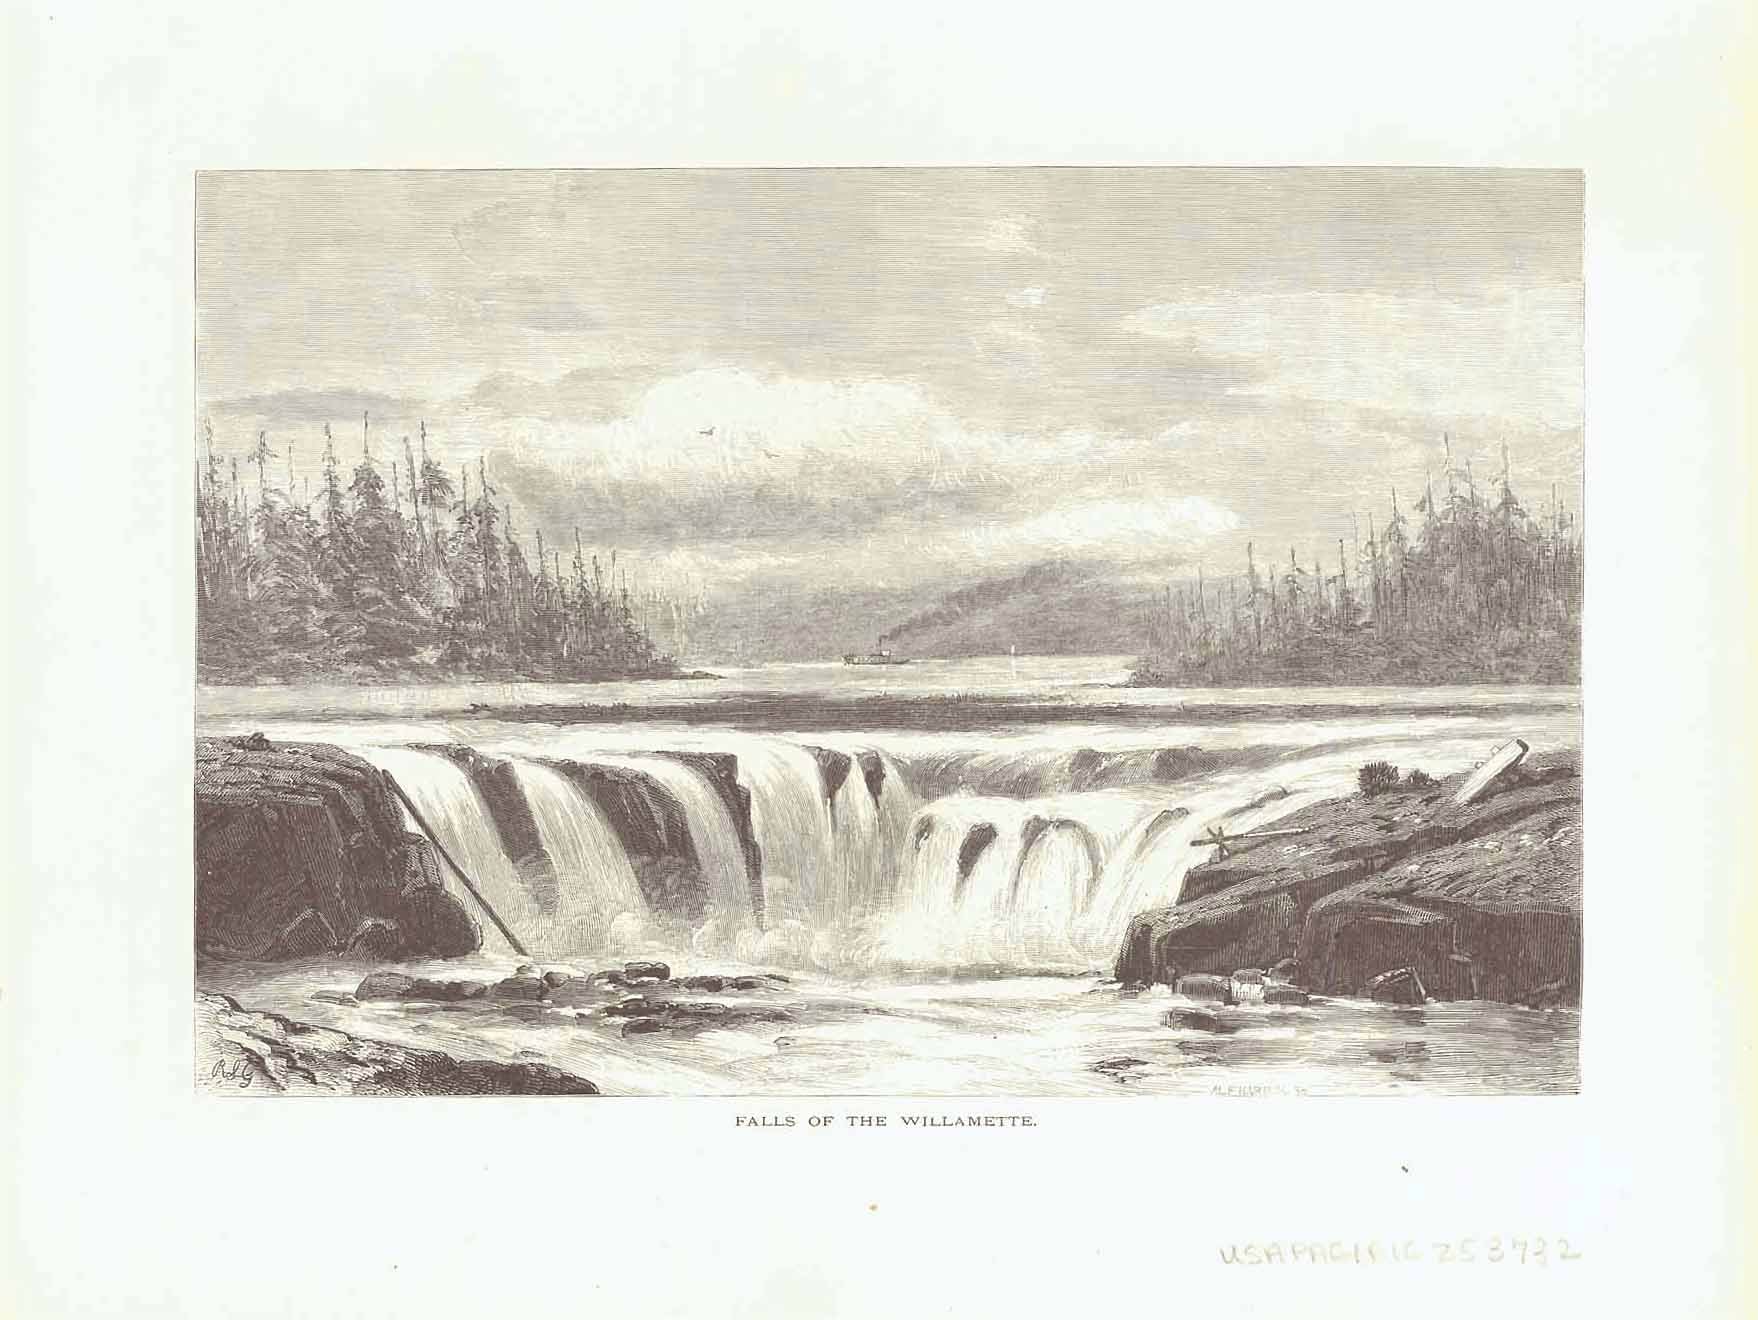 "Falls of the Willamette"  Wood engraving published ca 1875. On the reverse side is text about early exploration and settlement in Oregon.  Original antique print 